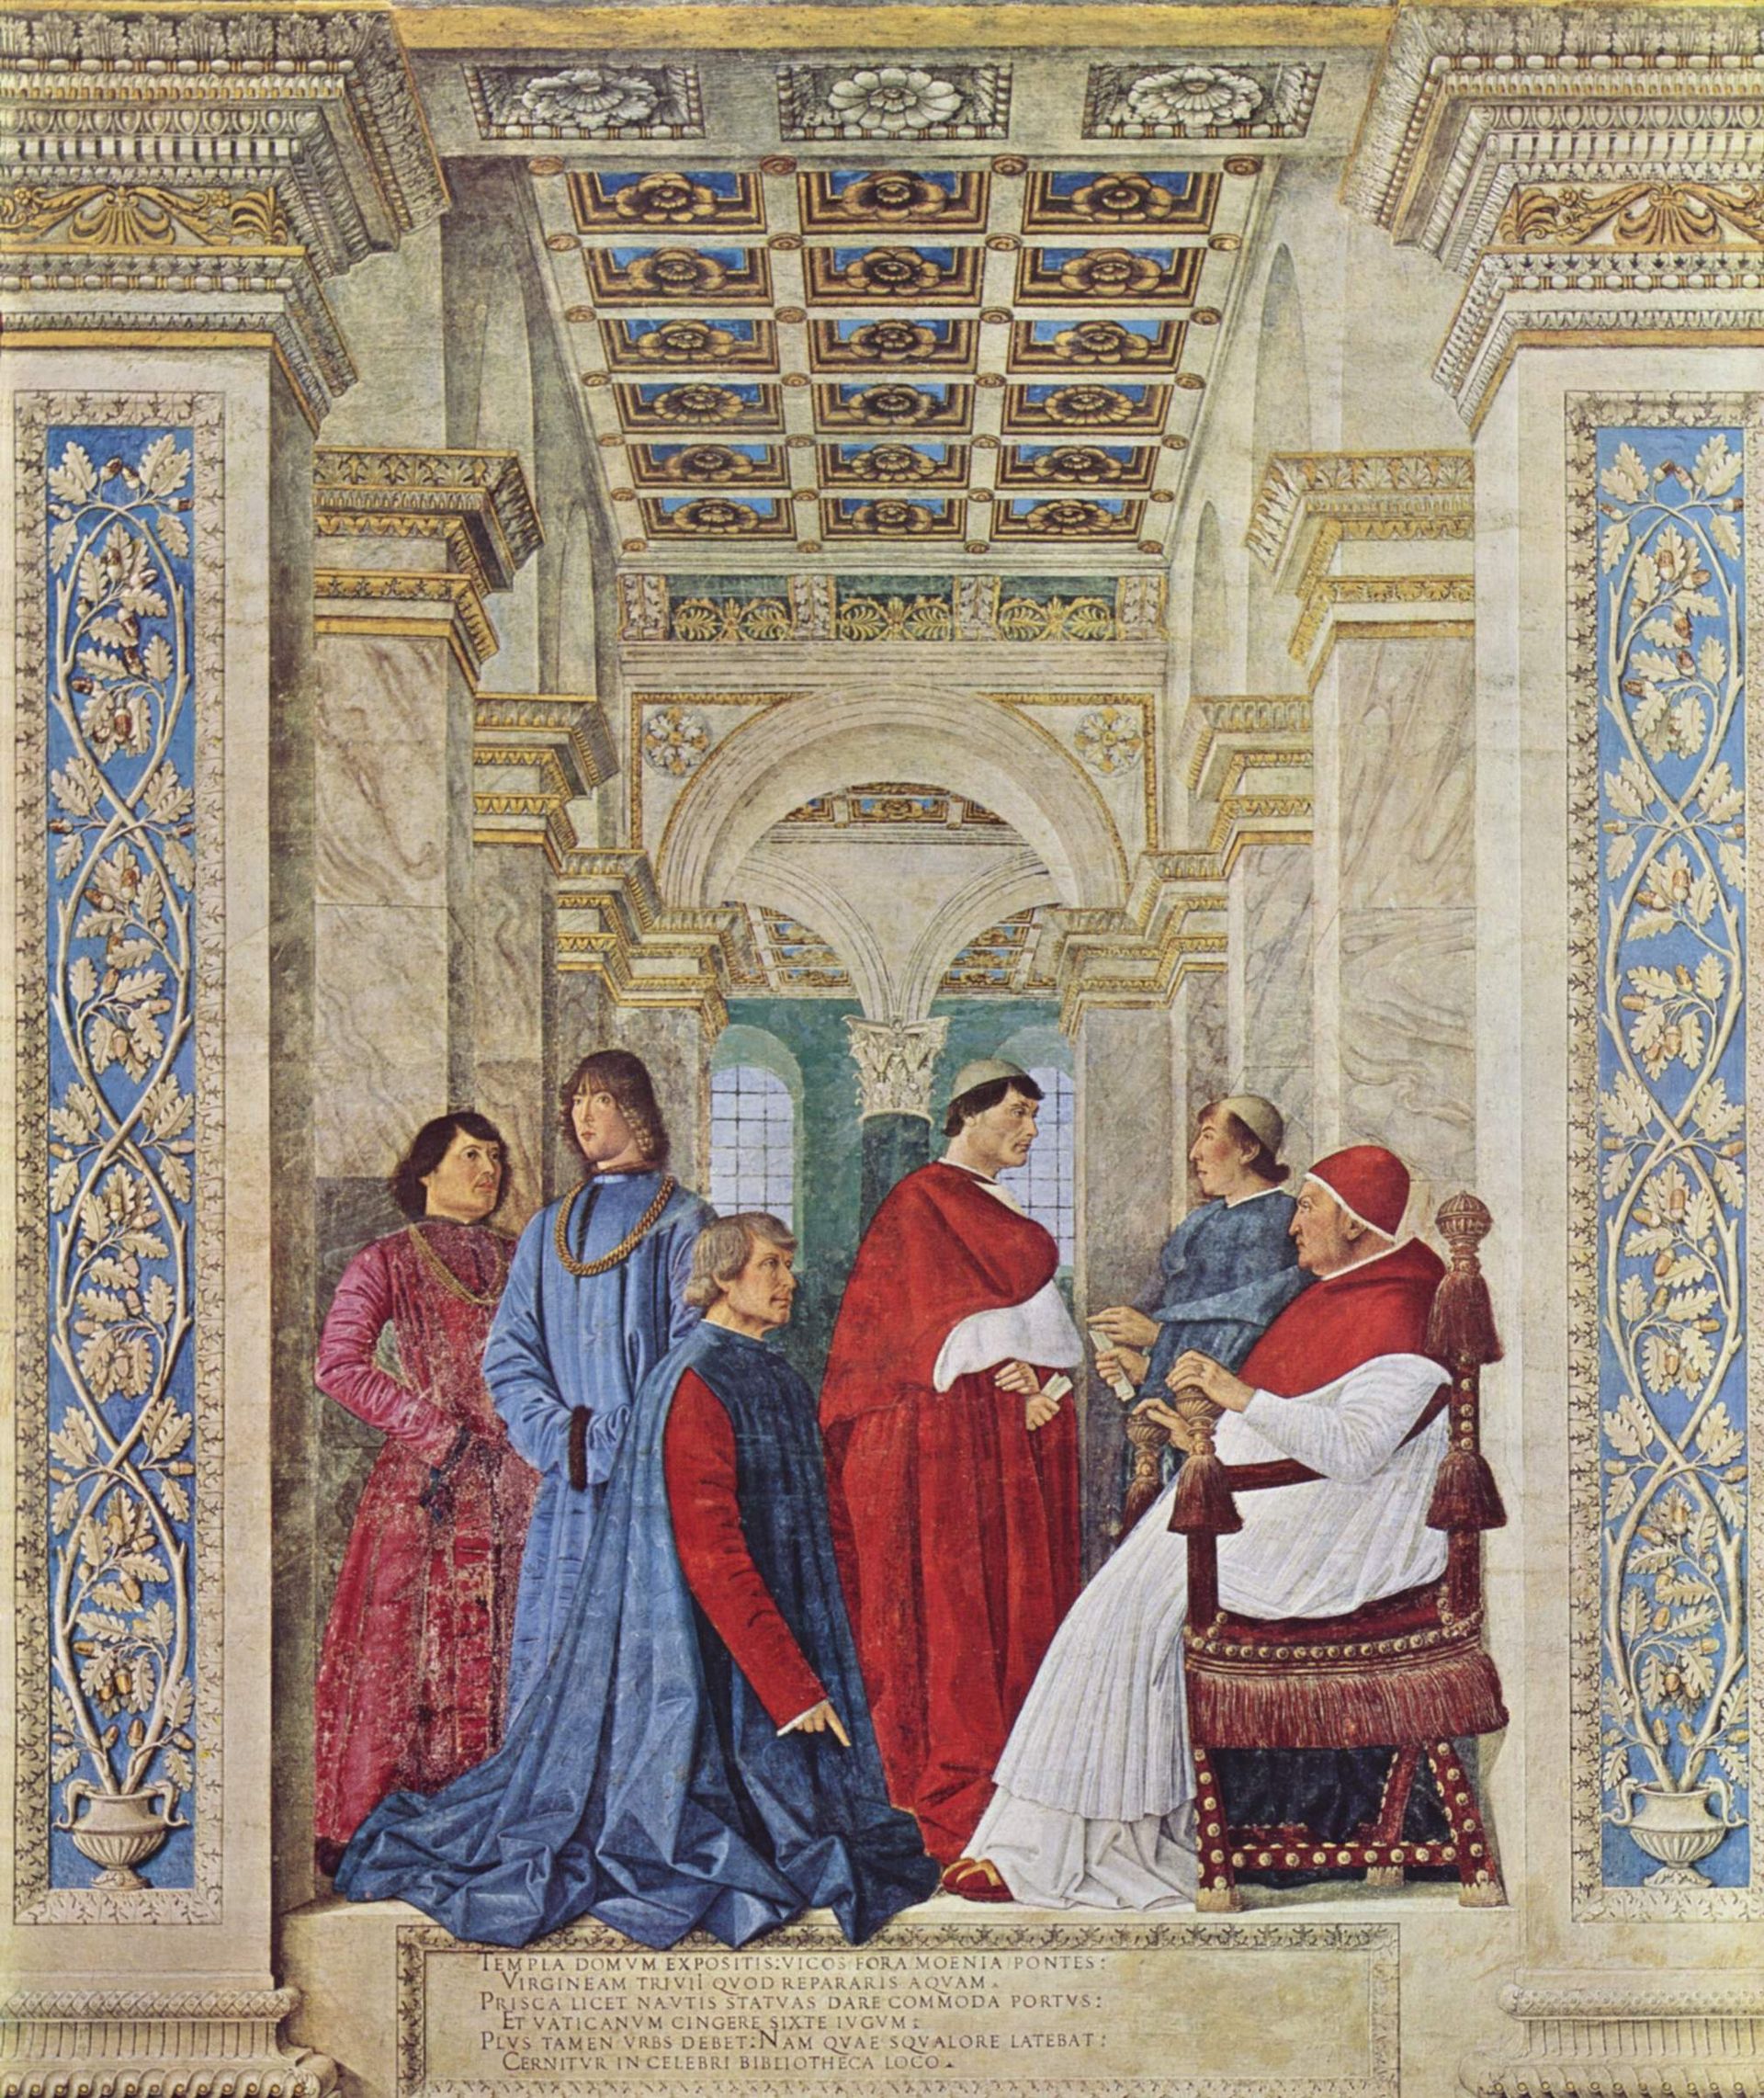 Pope Sixtus IV appoints Platina as Prefect of the Library, by&nbsp;<a href="https://en.wikipedia.org/wiki/Melozzo_da_Forl%C3%AC">Melozzo da Forlì</a>, accompanied by his relatives (<a href="https://en.wikipedia.org/wiki/Pope_Sixtus_IV#/media/File:Melozzo_da_Forl%C3%AC_001.jpg" target="_blank" rel="noreferrer noopener">Public Domain</a>)